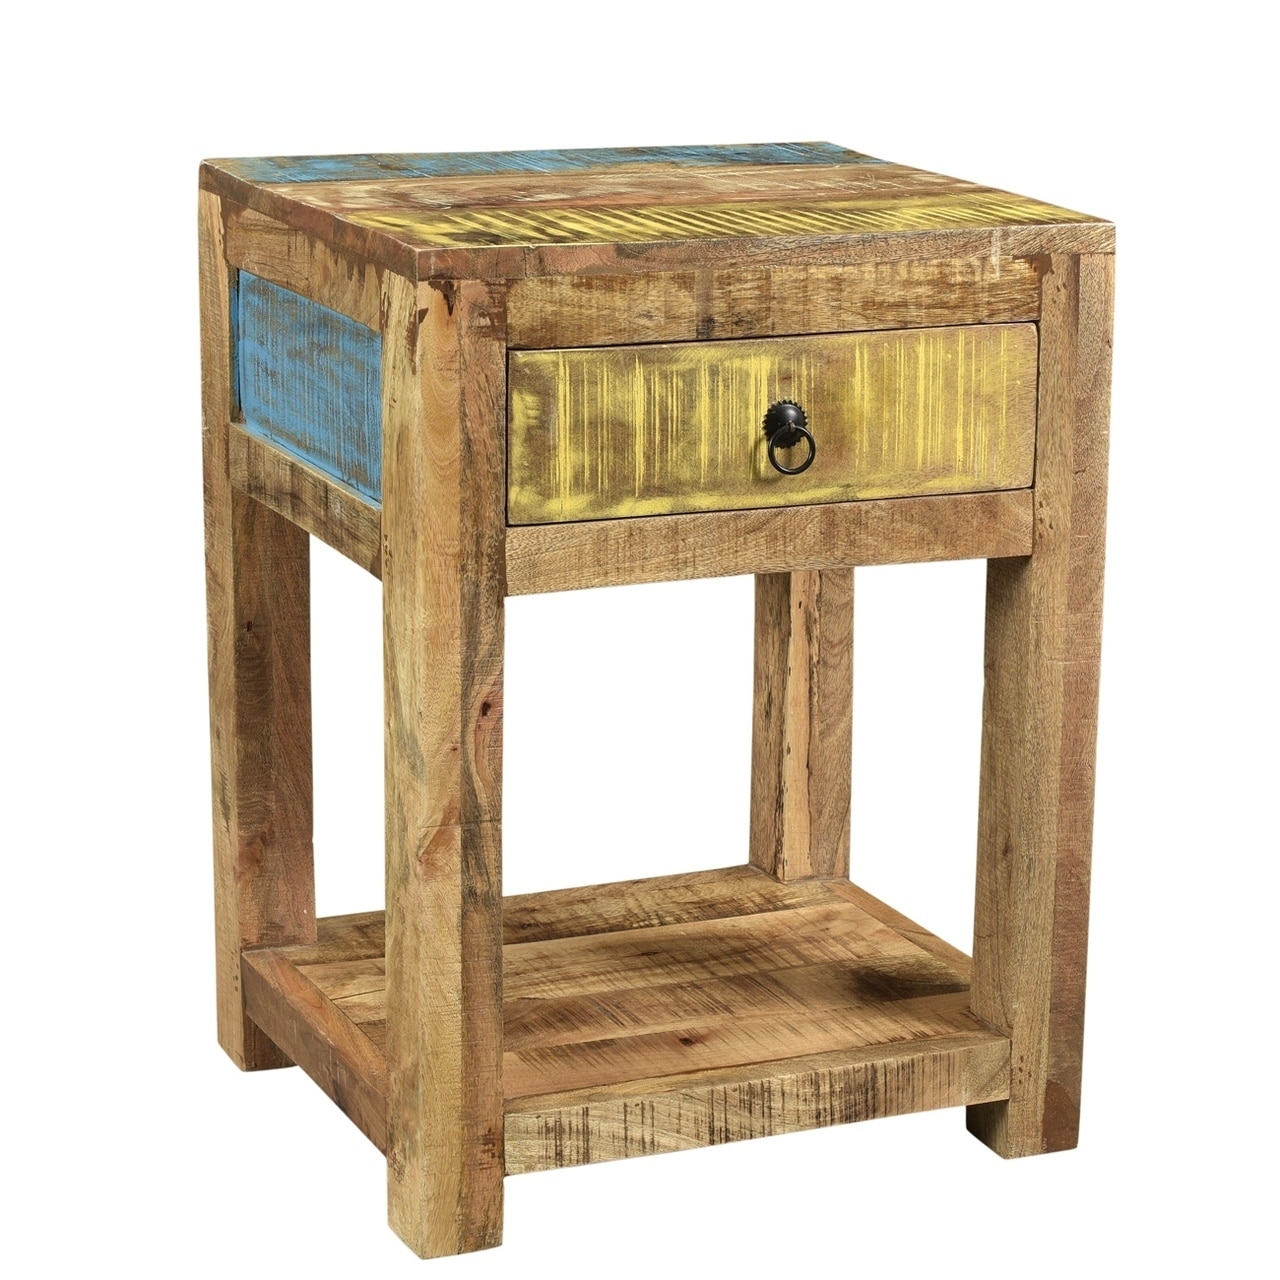 Handcrafted Reclaimed Wood Side Table Natural - Timbergir